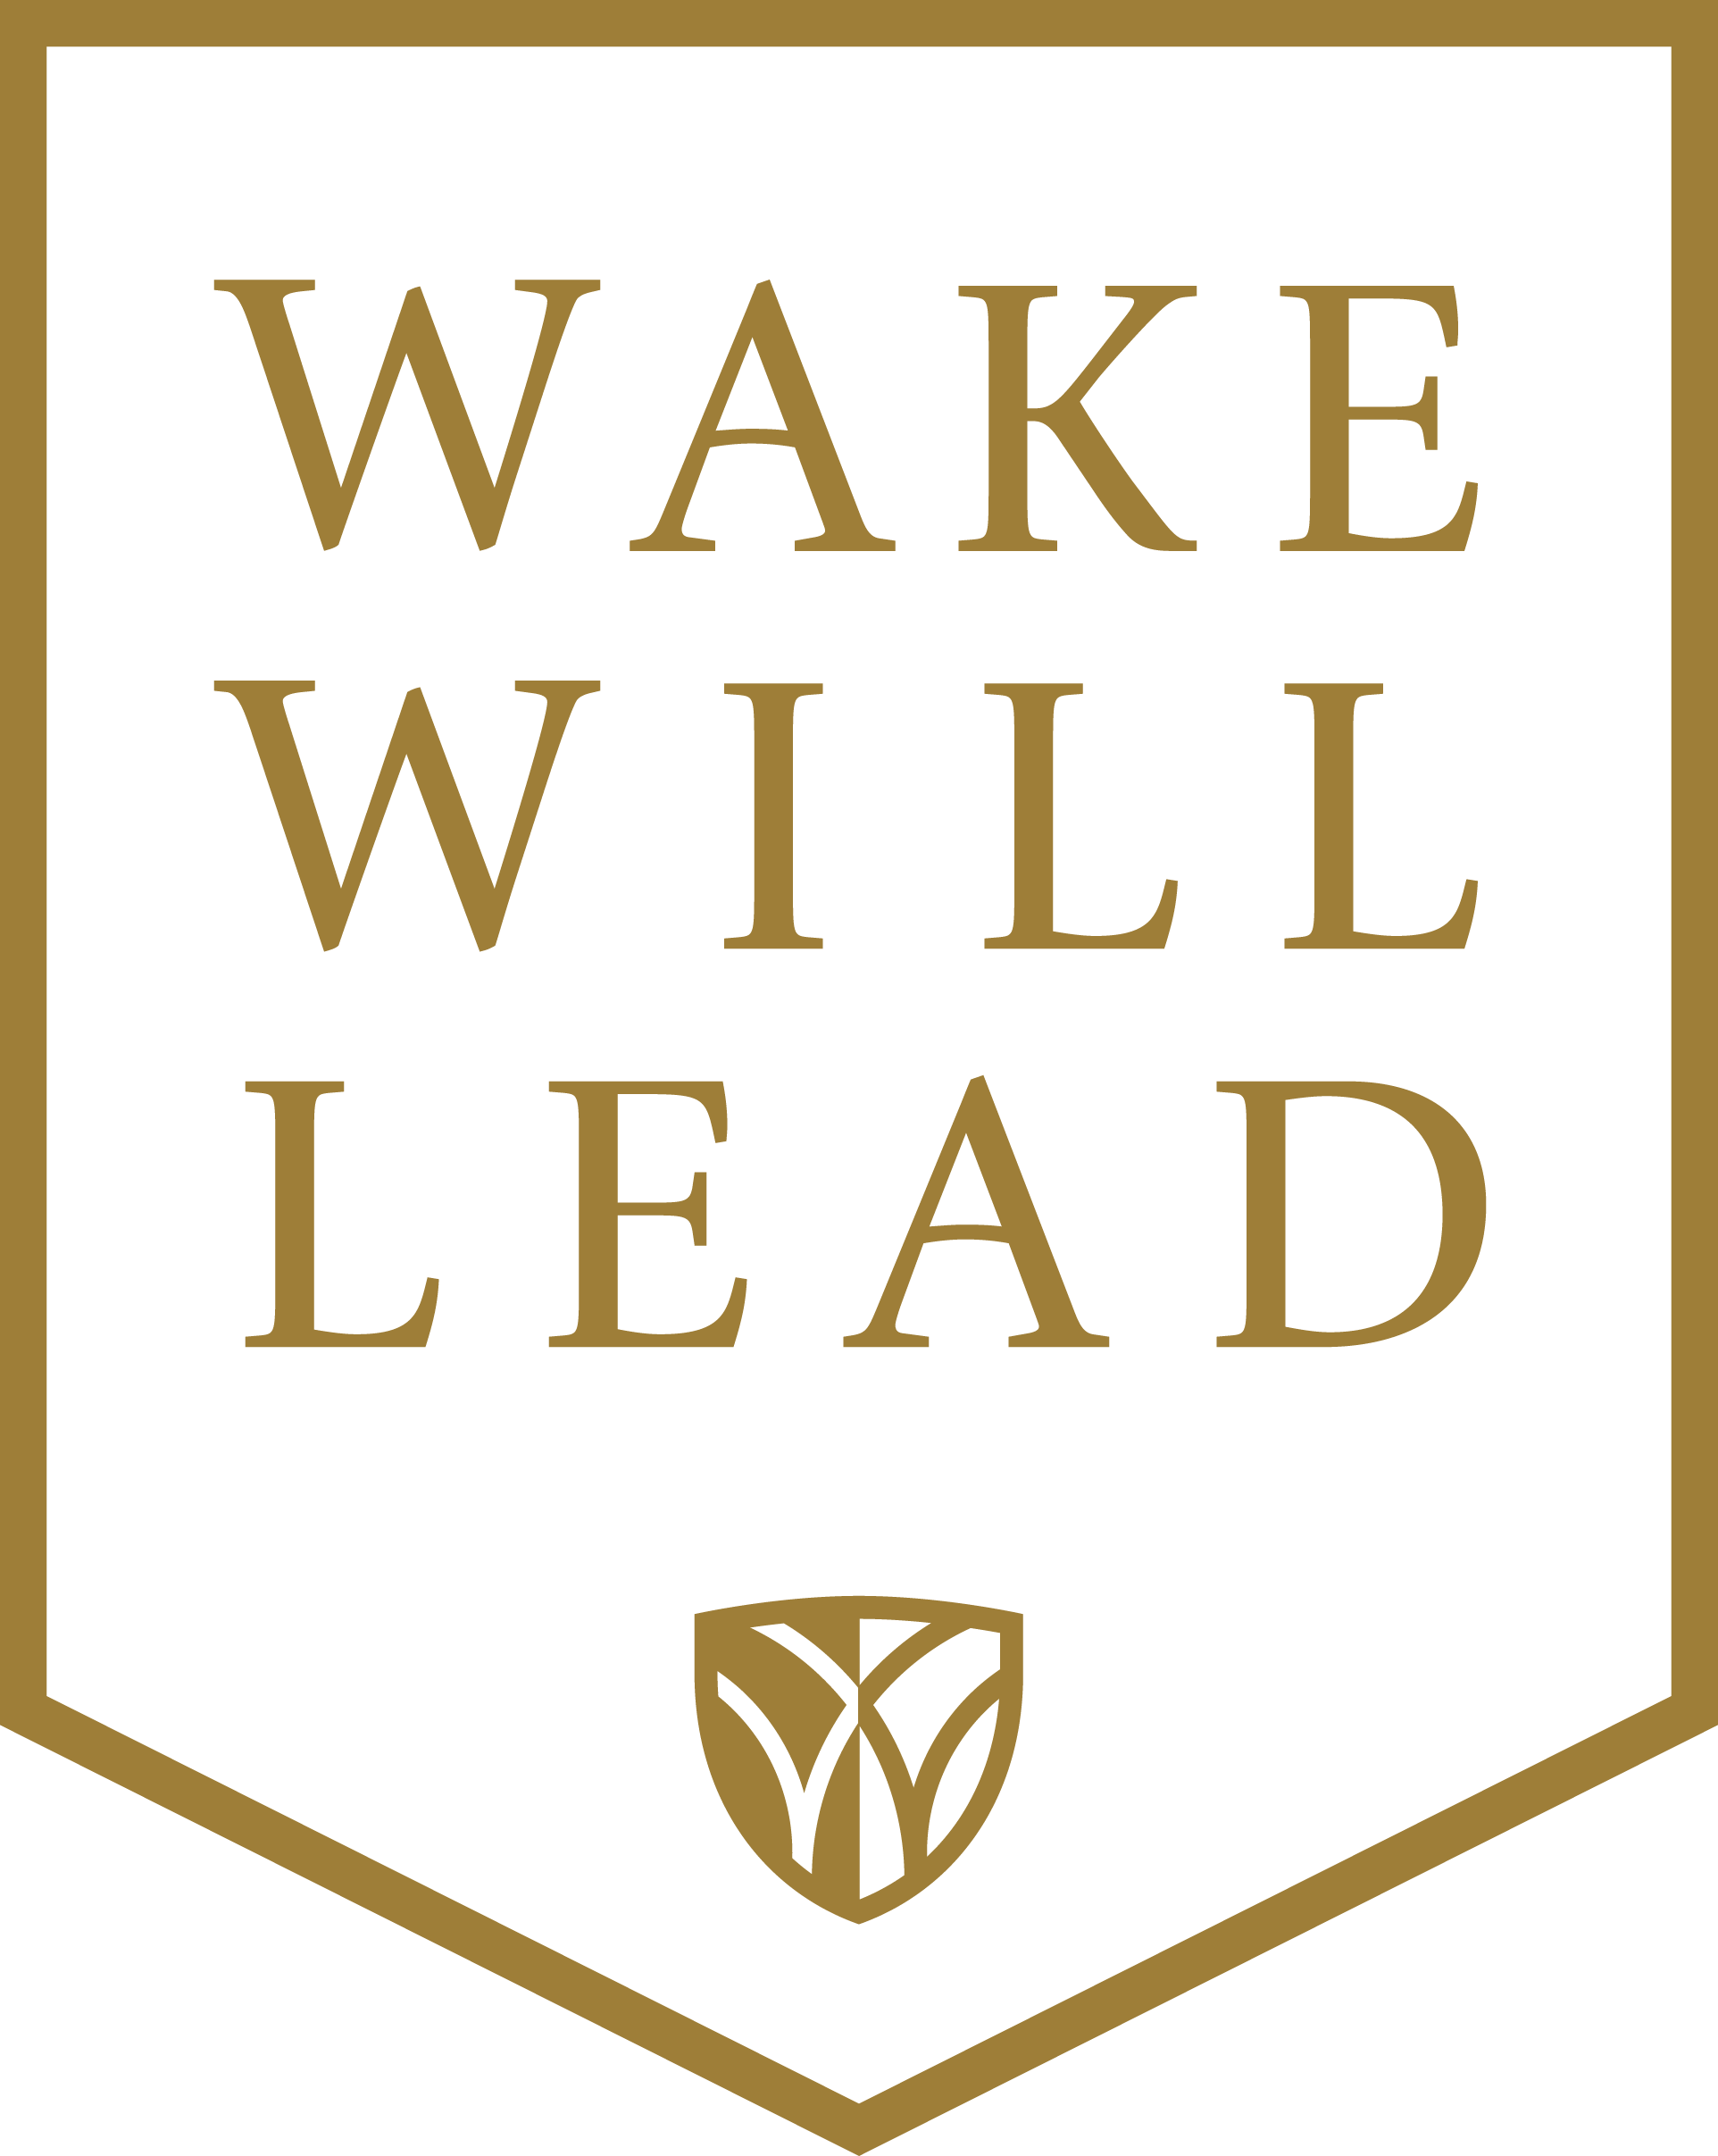 Giving to Wake Forest